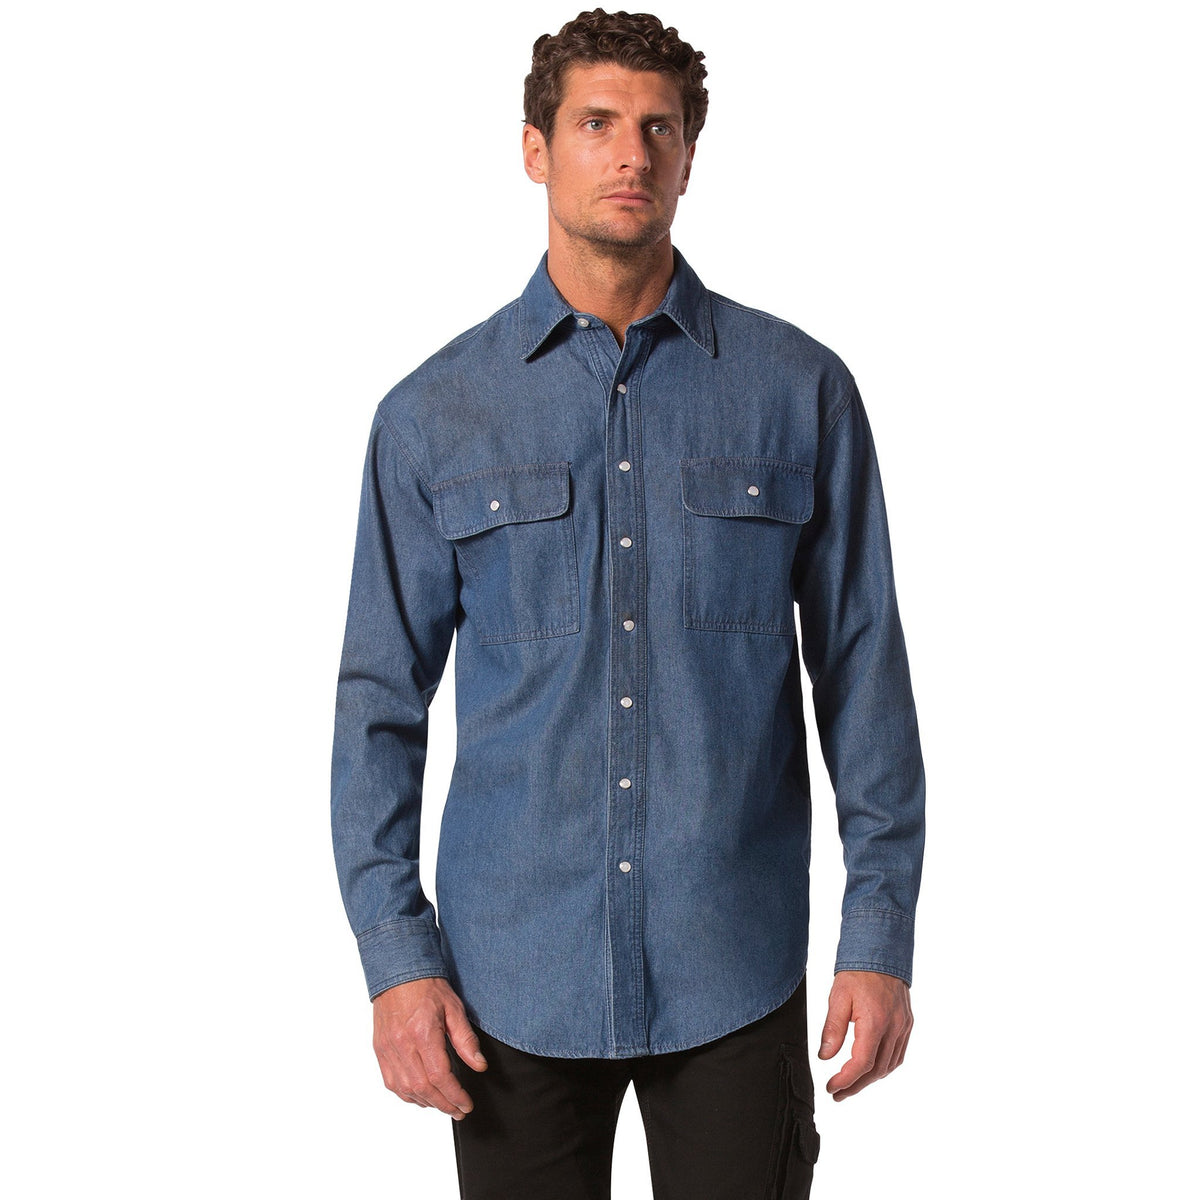 Download Men's Long Sleeve Cotton Denim Work Shirt With A Snap ...